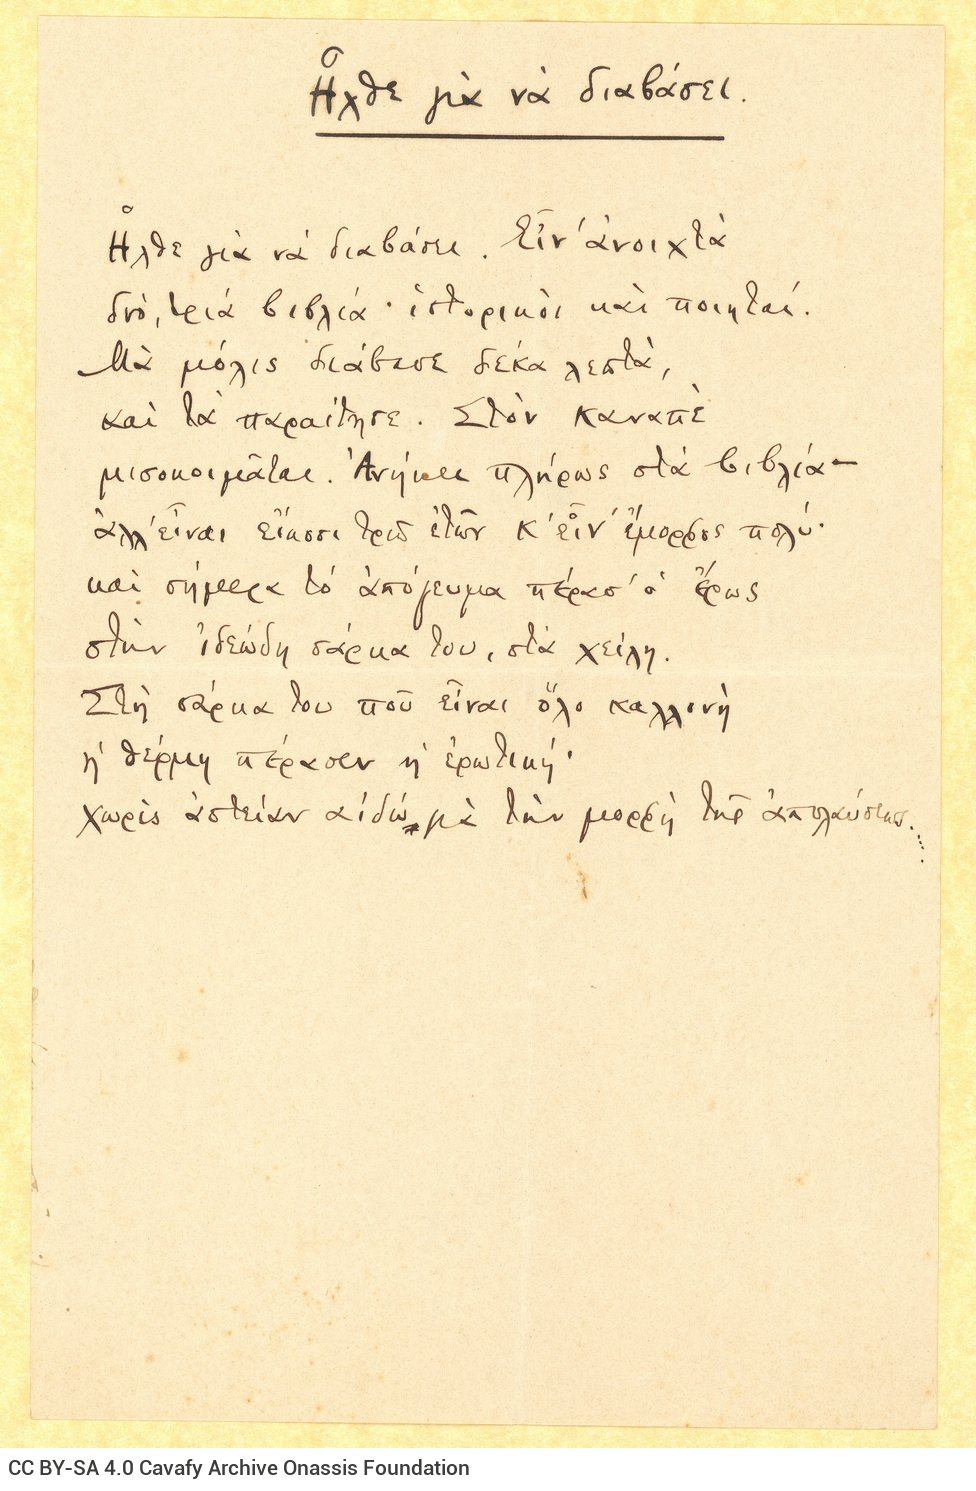 Manuscript of the poem "He Came to Read" on one side of a sheet. Blank verso.